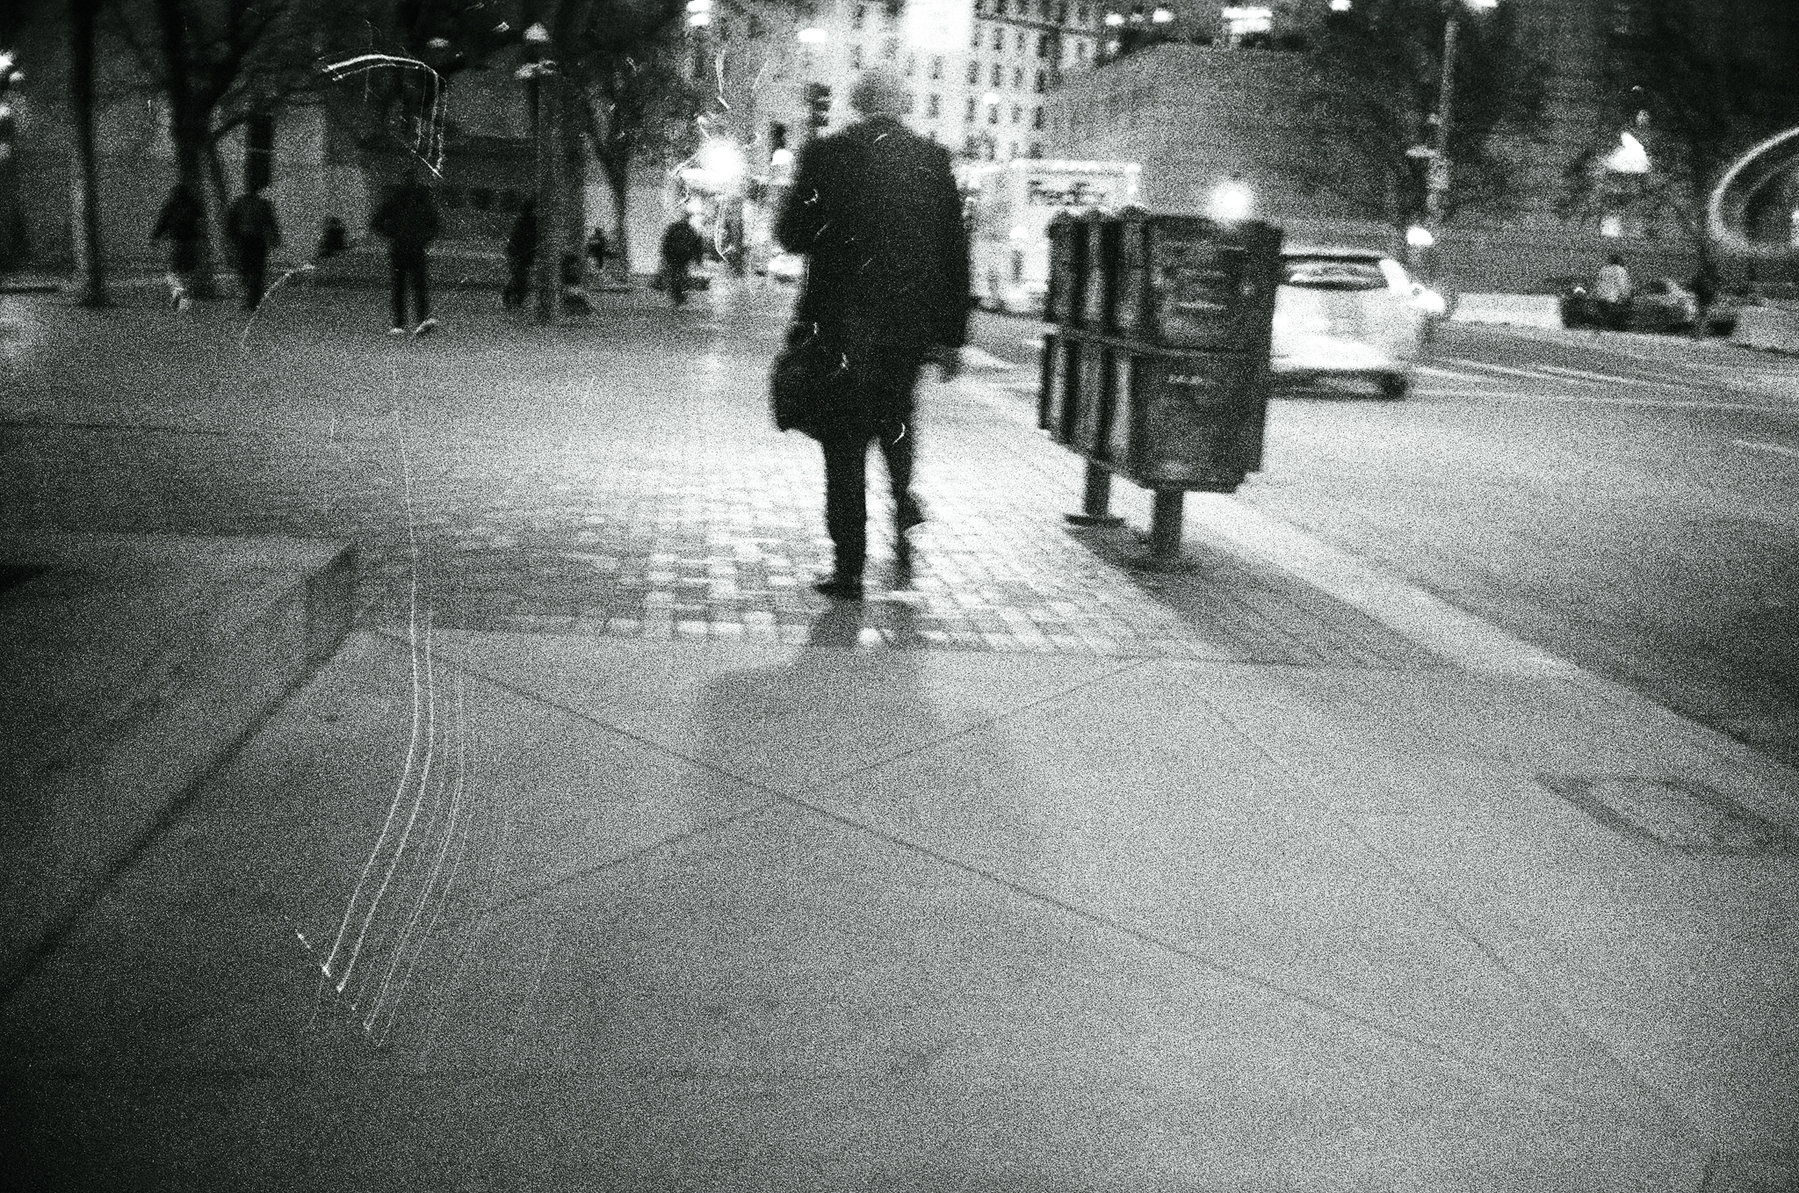 a scan of a black and white photograph of a person walking down a street in downtown San Francisco, there are streaks of light around the film negative scan